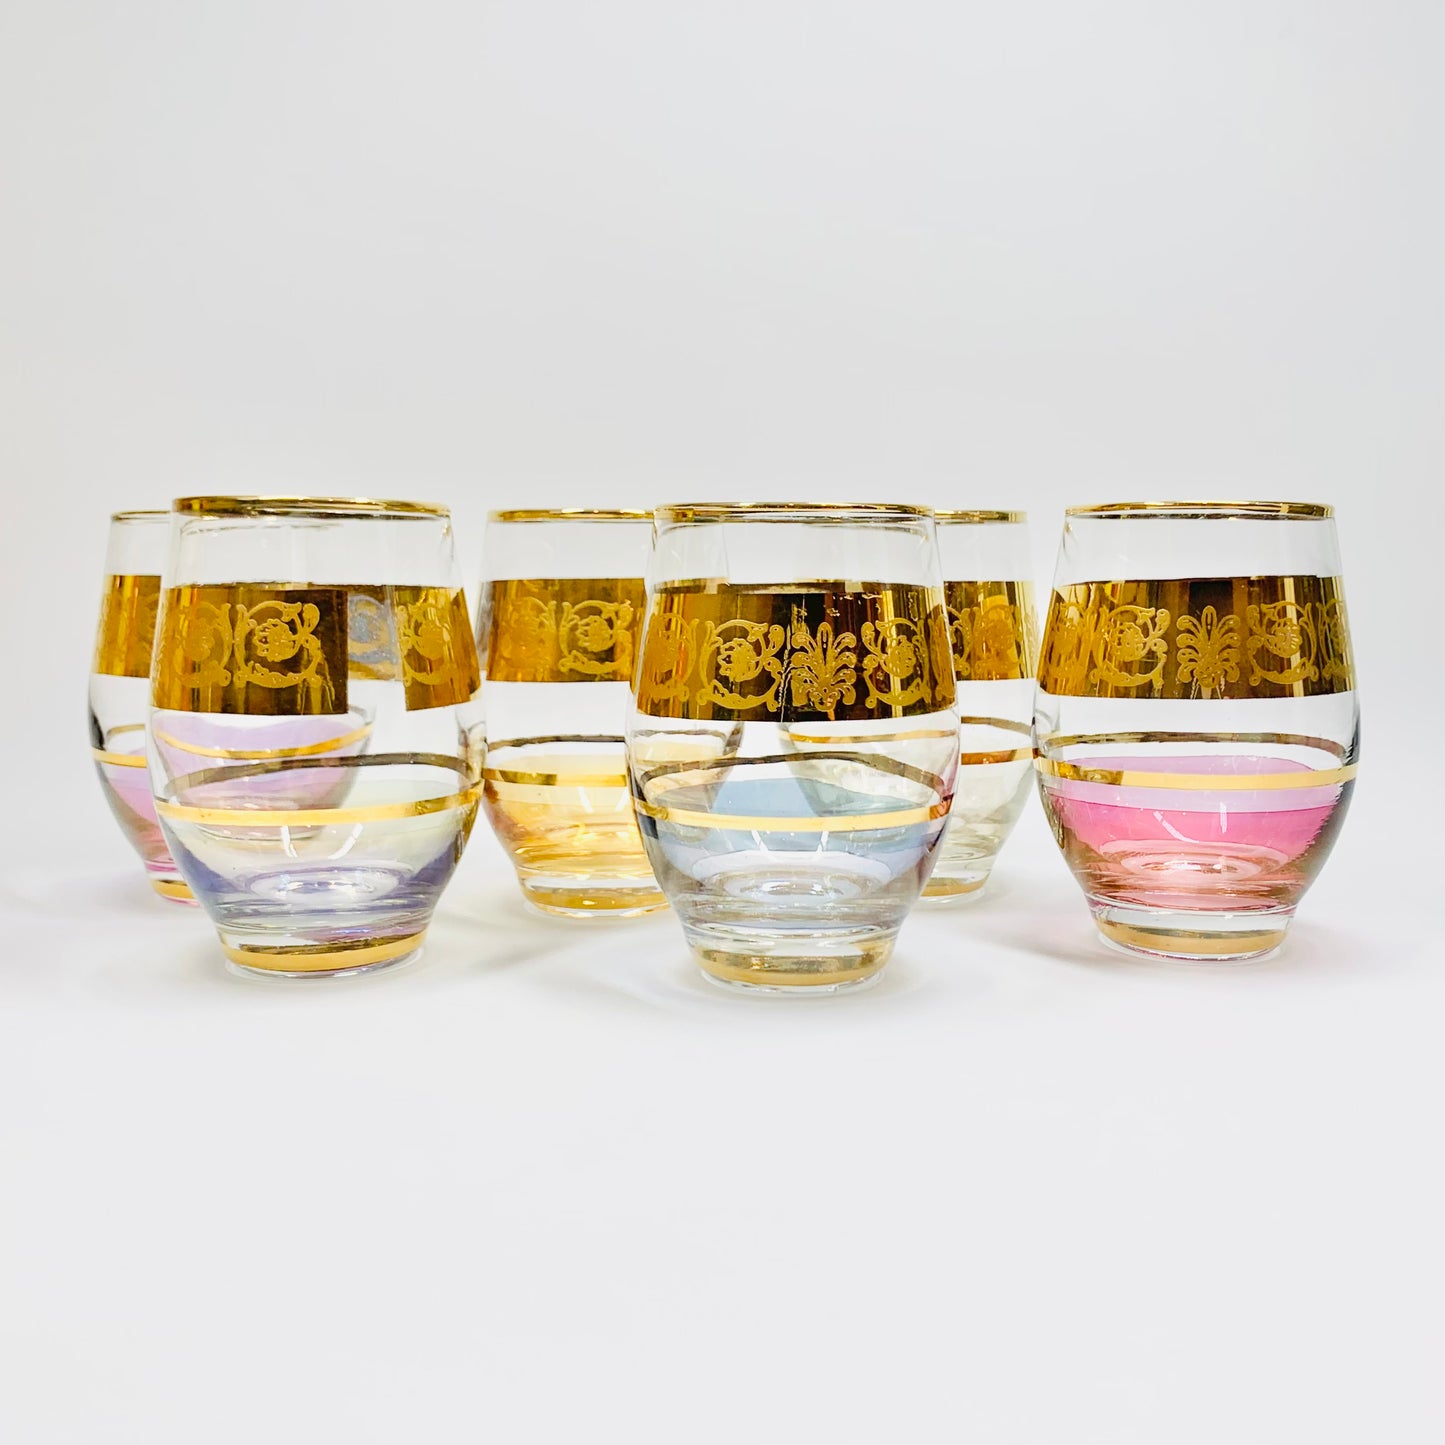 Extremely rare 1940s harlequin 24K gold gilded iridescent lustreware glass water tumblers